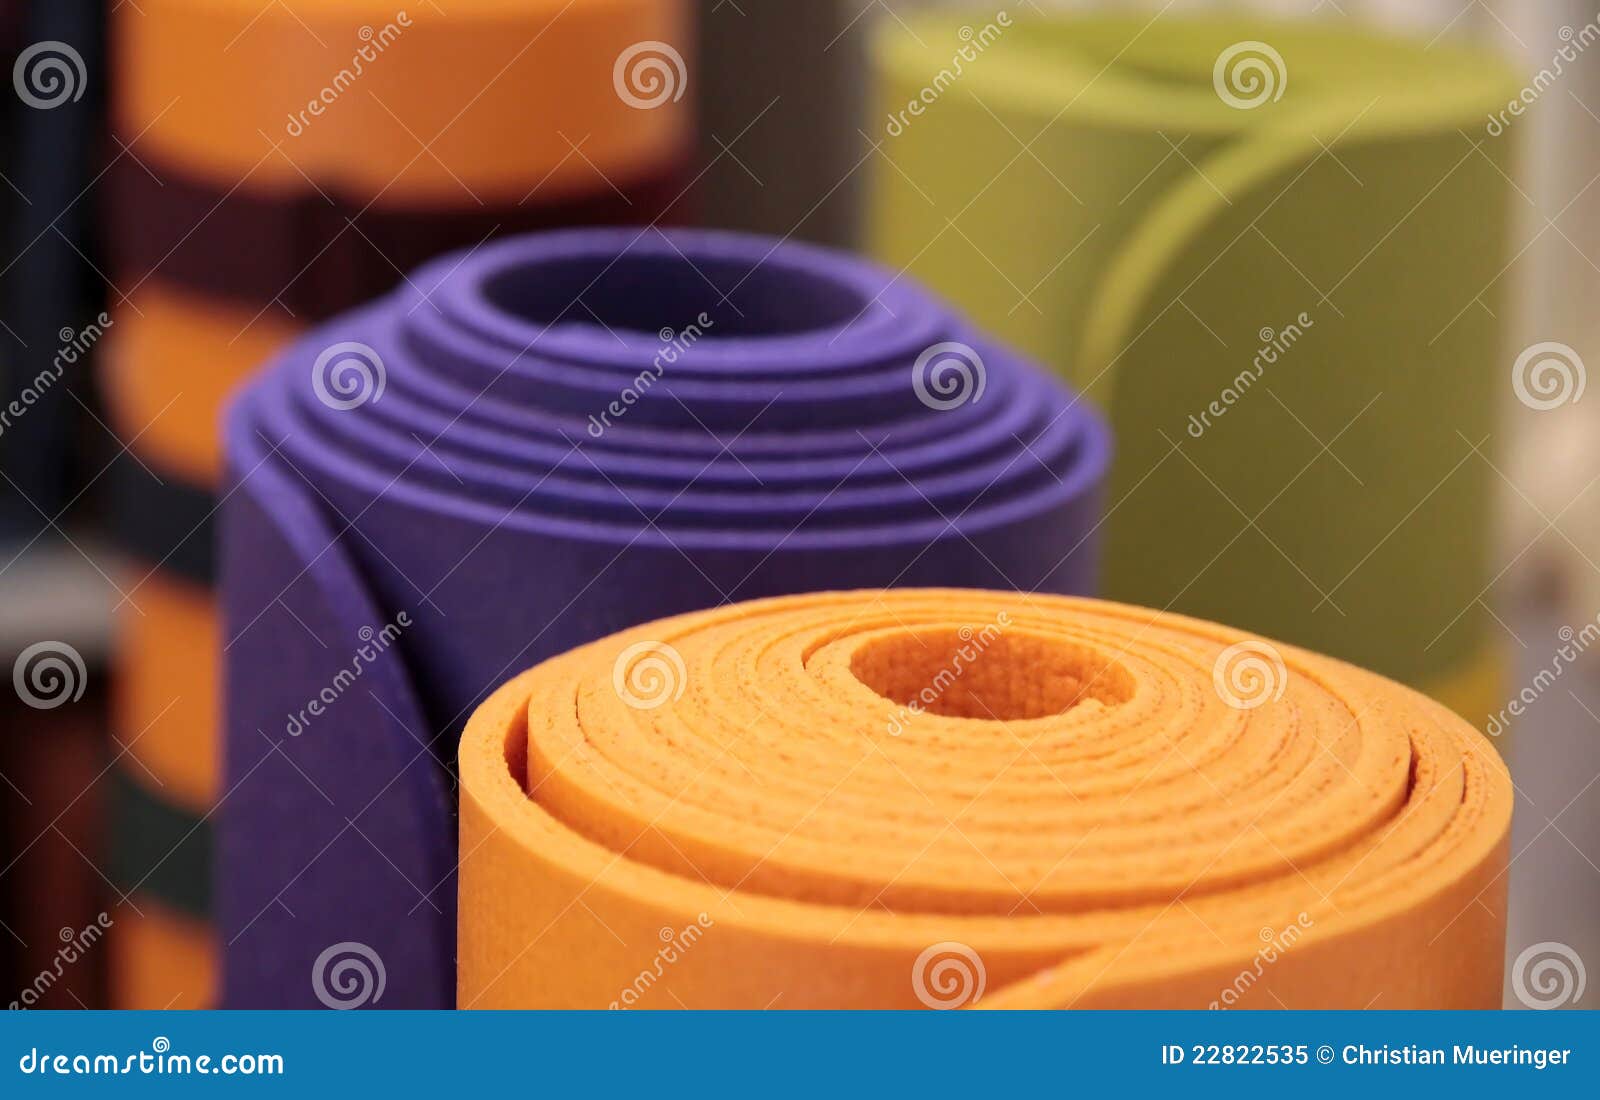 Rolled-up yoga mats stock image. Image of rolled, close - 22822535